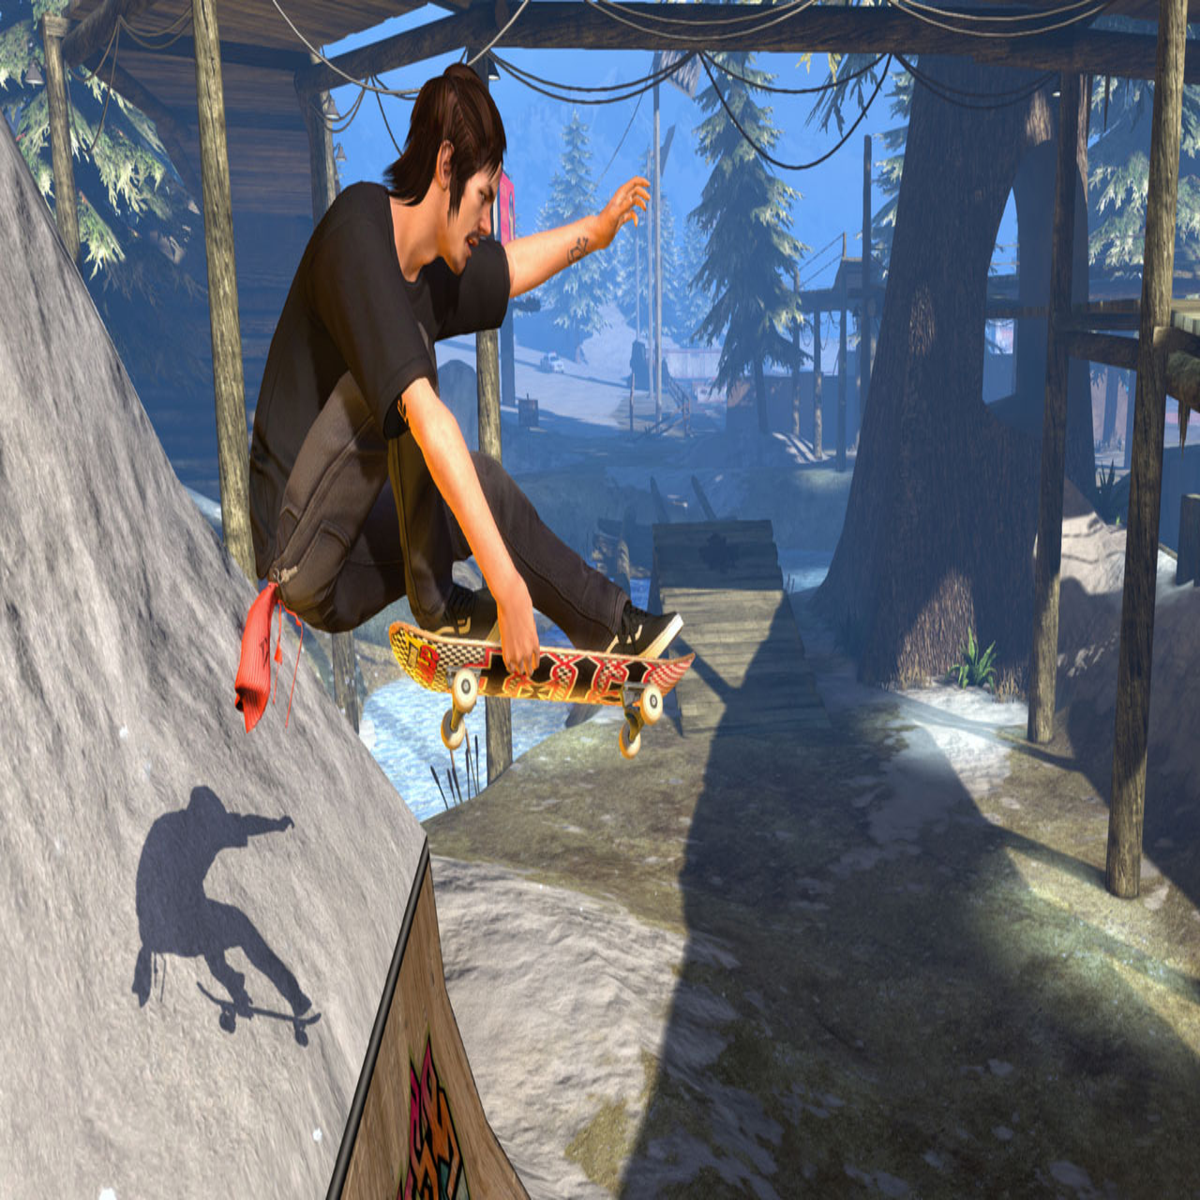 The remastered 'Tony Hawk's Pro Skater' is as good as it's ever been 